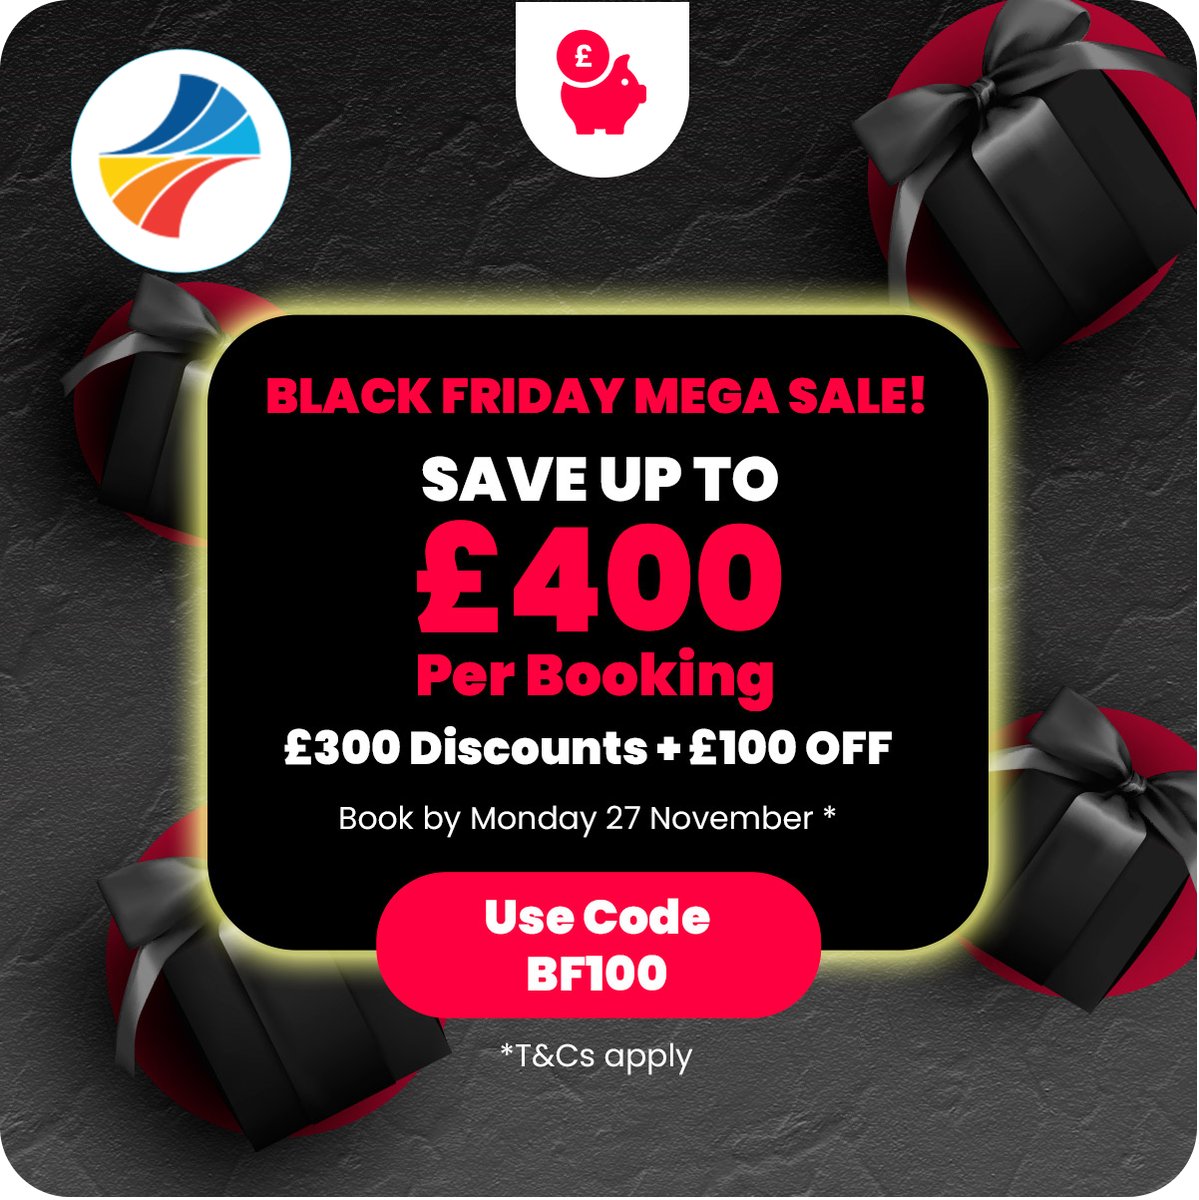 🔥 Our BLACK FRIDAY MEGA SALE is ON and you can SAVE UP TO £400 per booking on all package holidays to Bulgaria, Croatia, Montenegro, Northern Cyprus and Malta! 🔥 🖤 Book today and get £100 off per booking in addition to our other savings of up to £300! bit.ly/47u6iyk